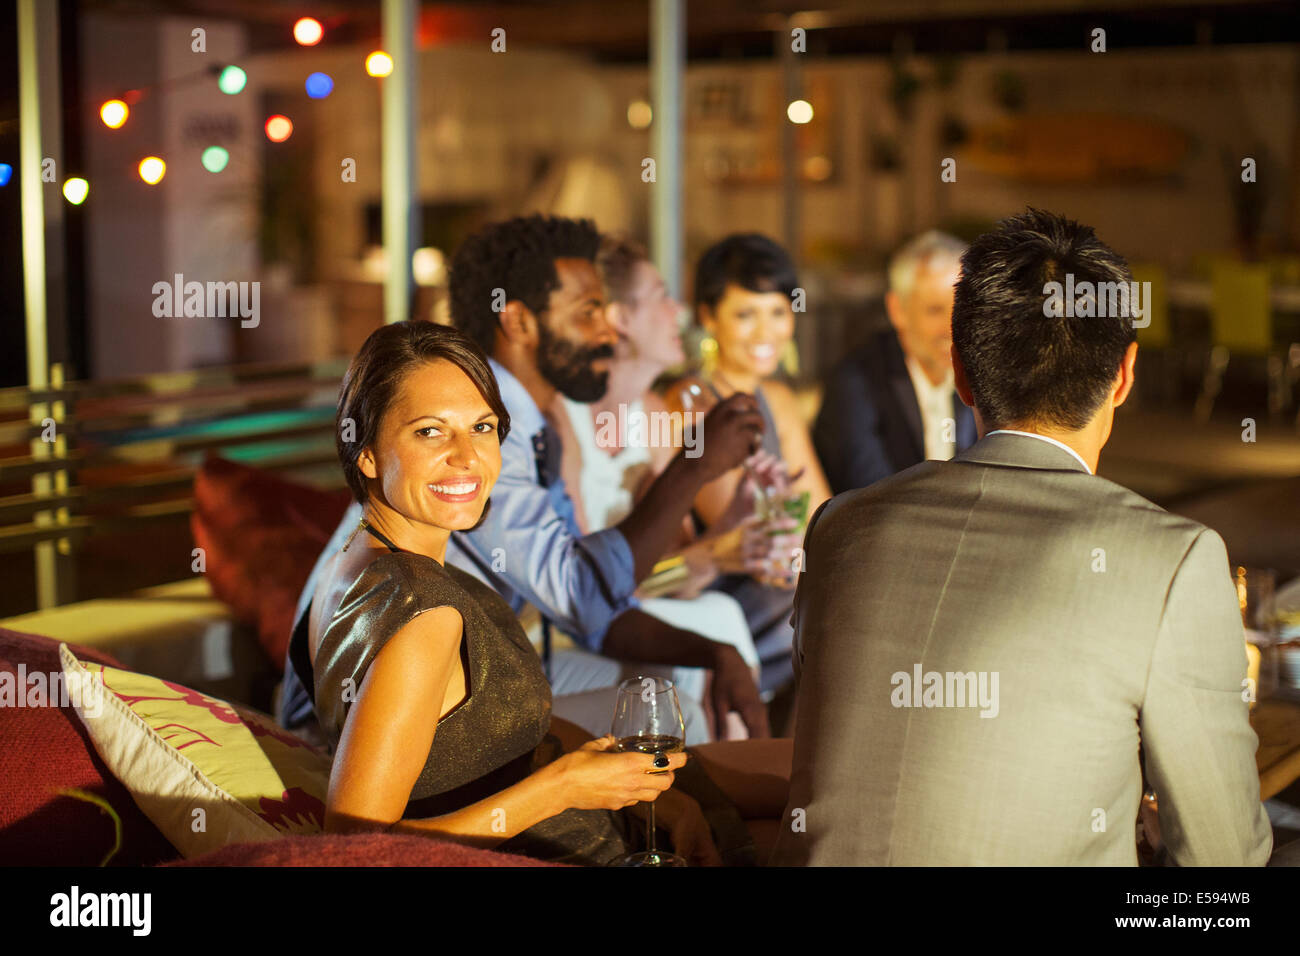 Friends relaxing together at party Banque D'Images